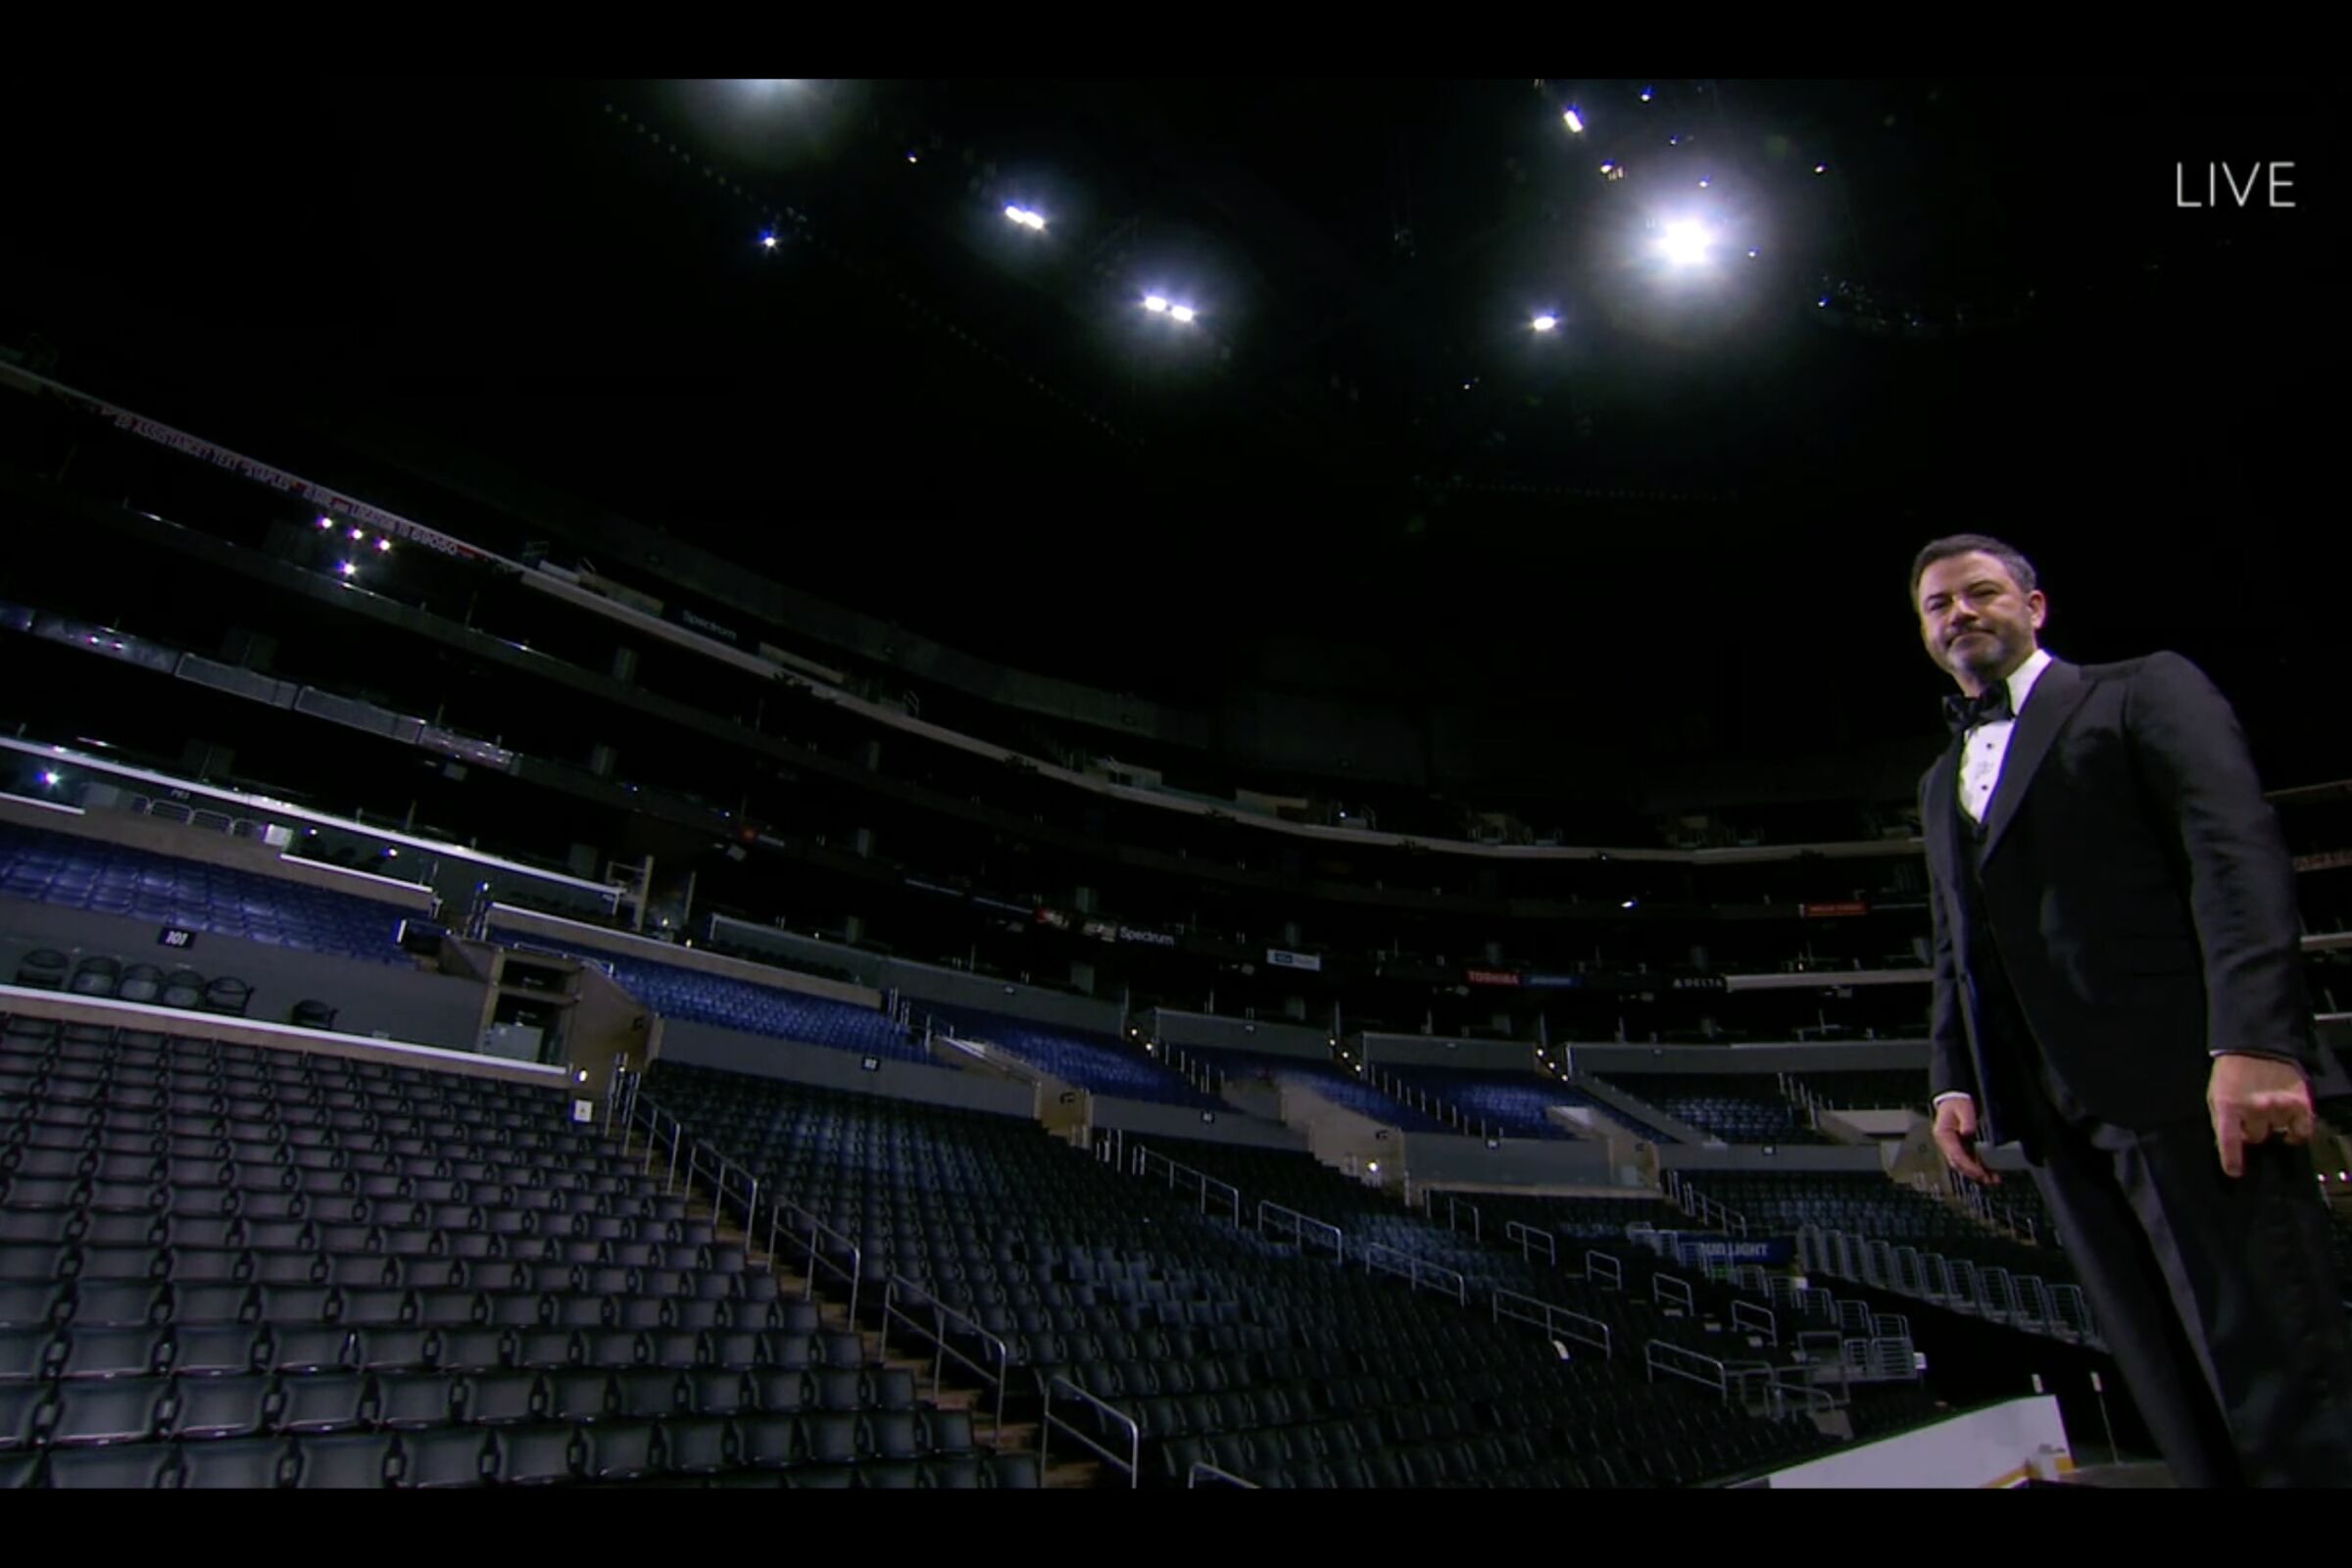 Jimmy Kimmel hosts the 72nd Emmy Awards at an empty Staples Center.